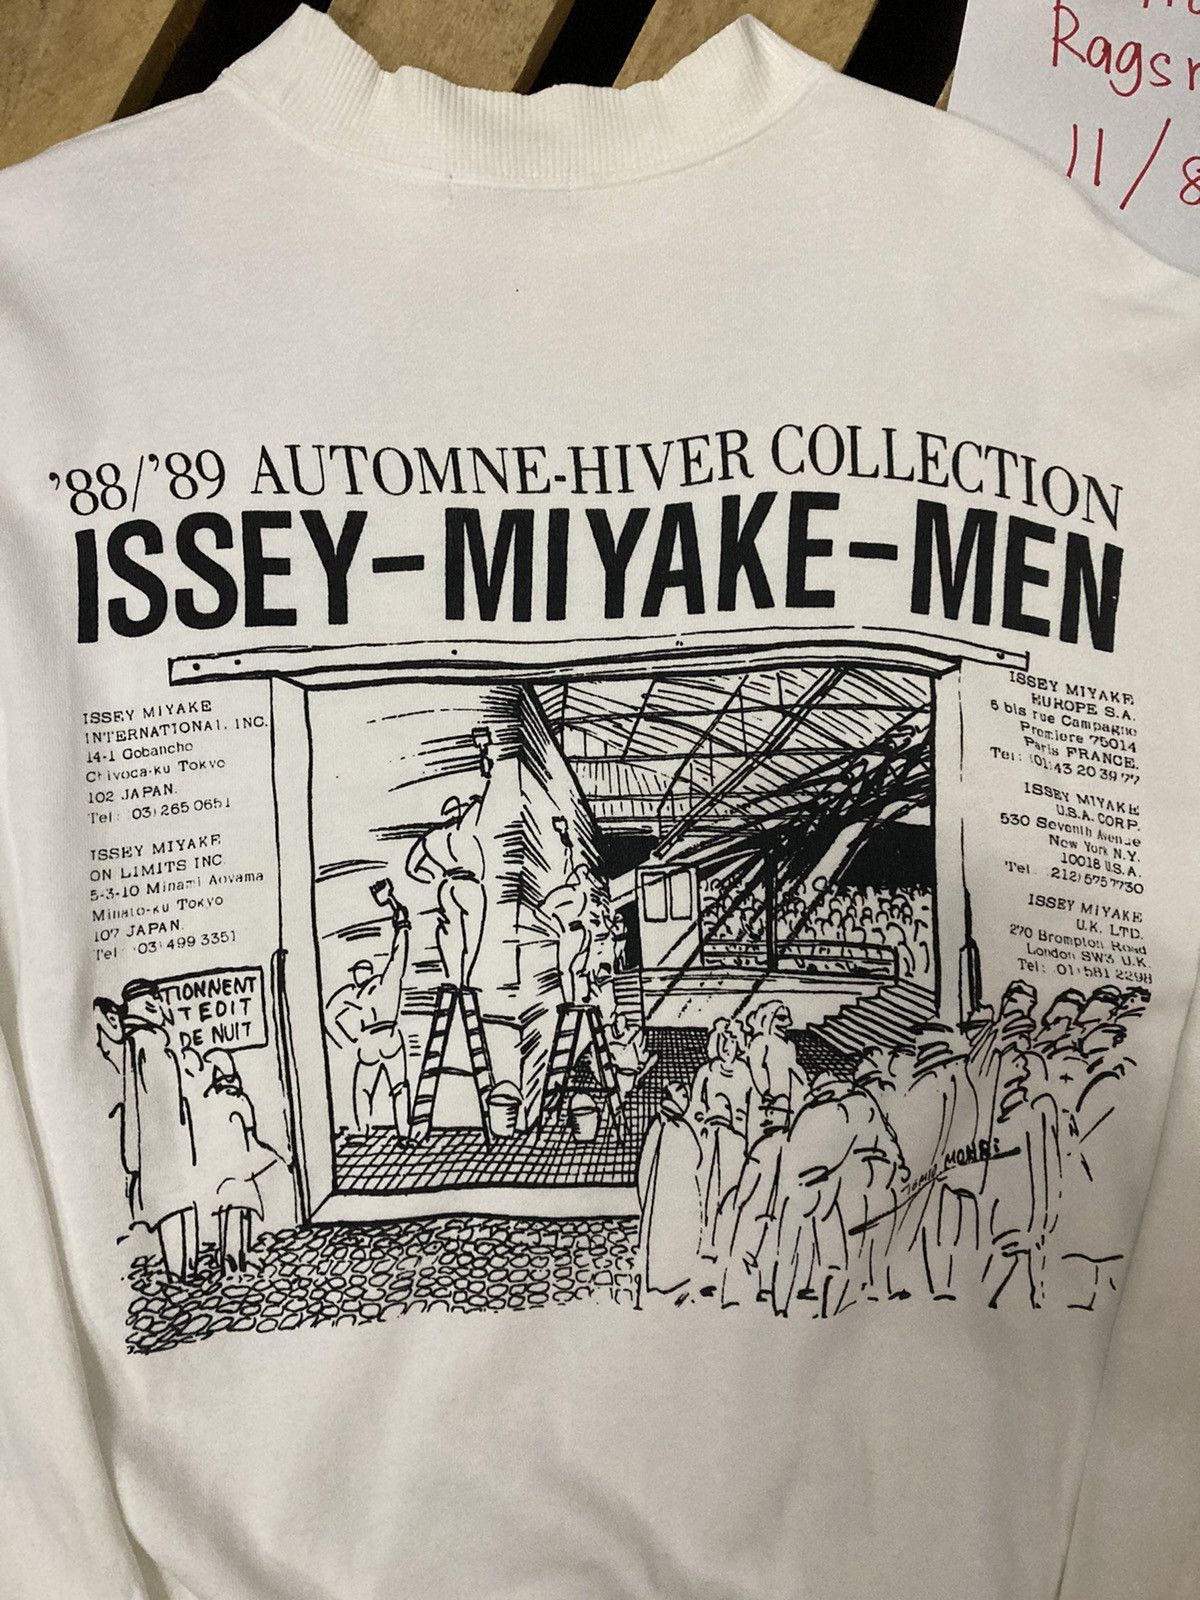 RARE Vintage 88/89 Issey Miyake Men Automne Hiver Collection - 4